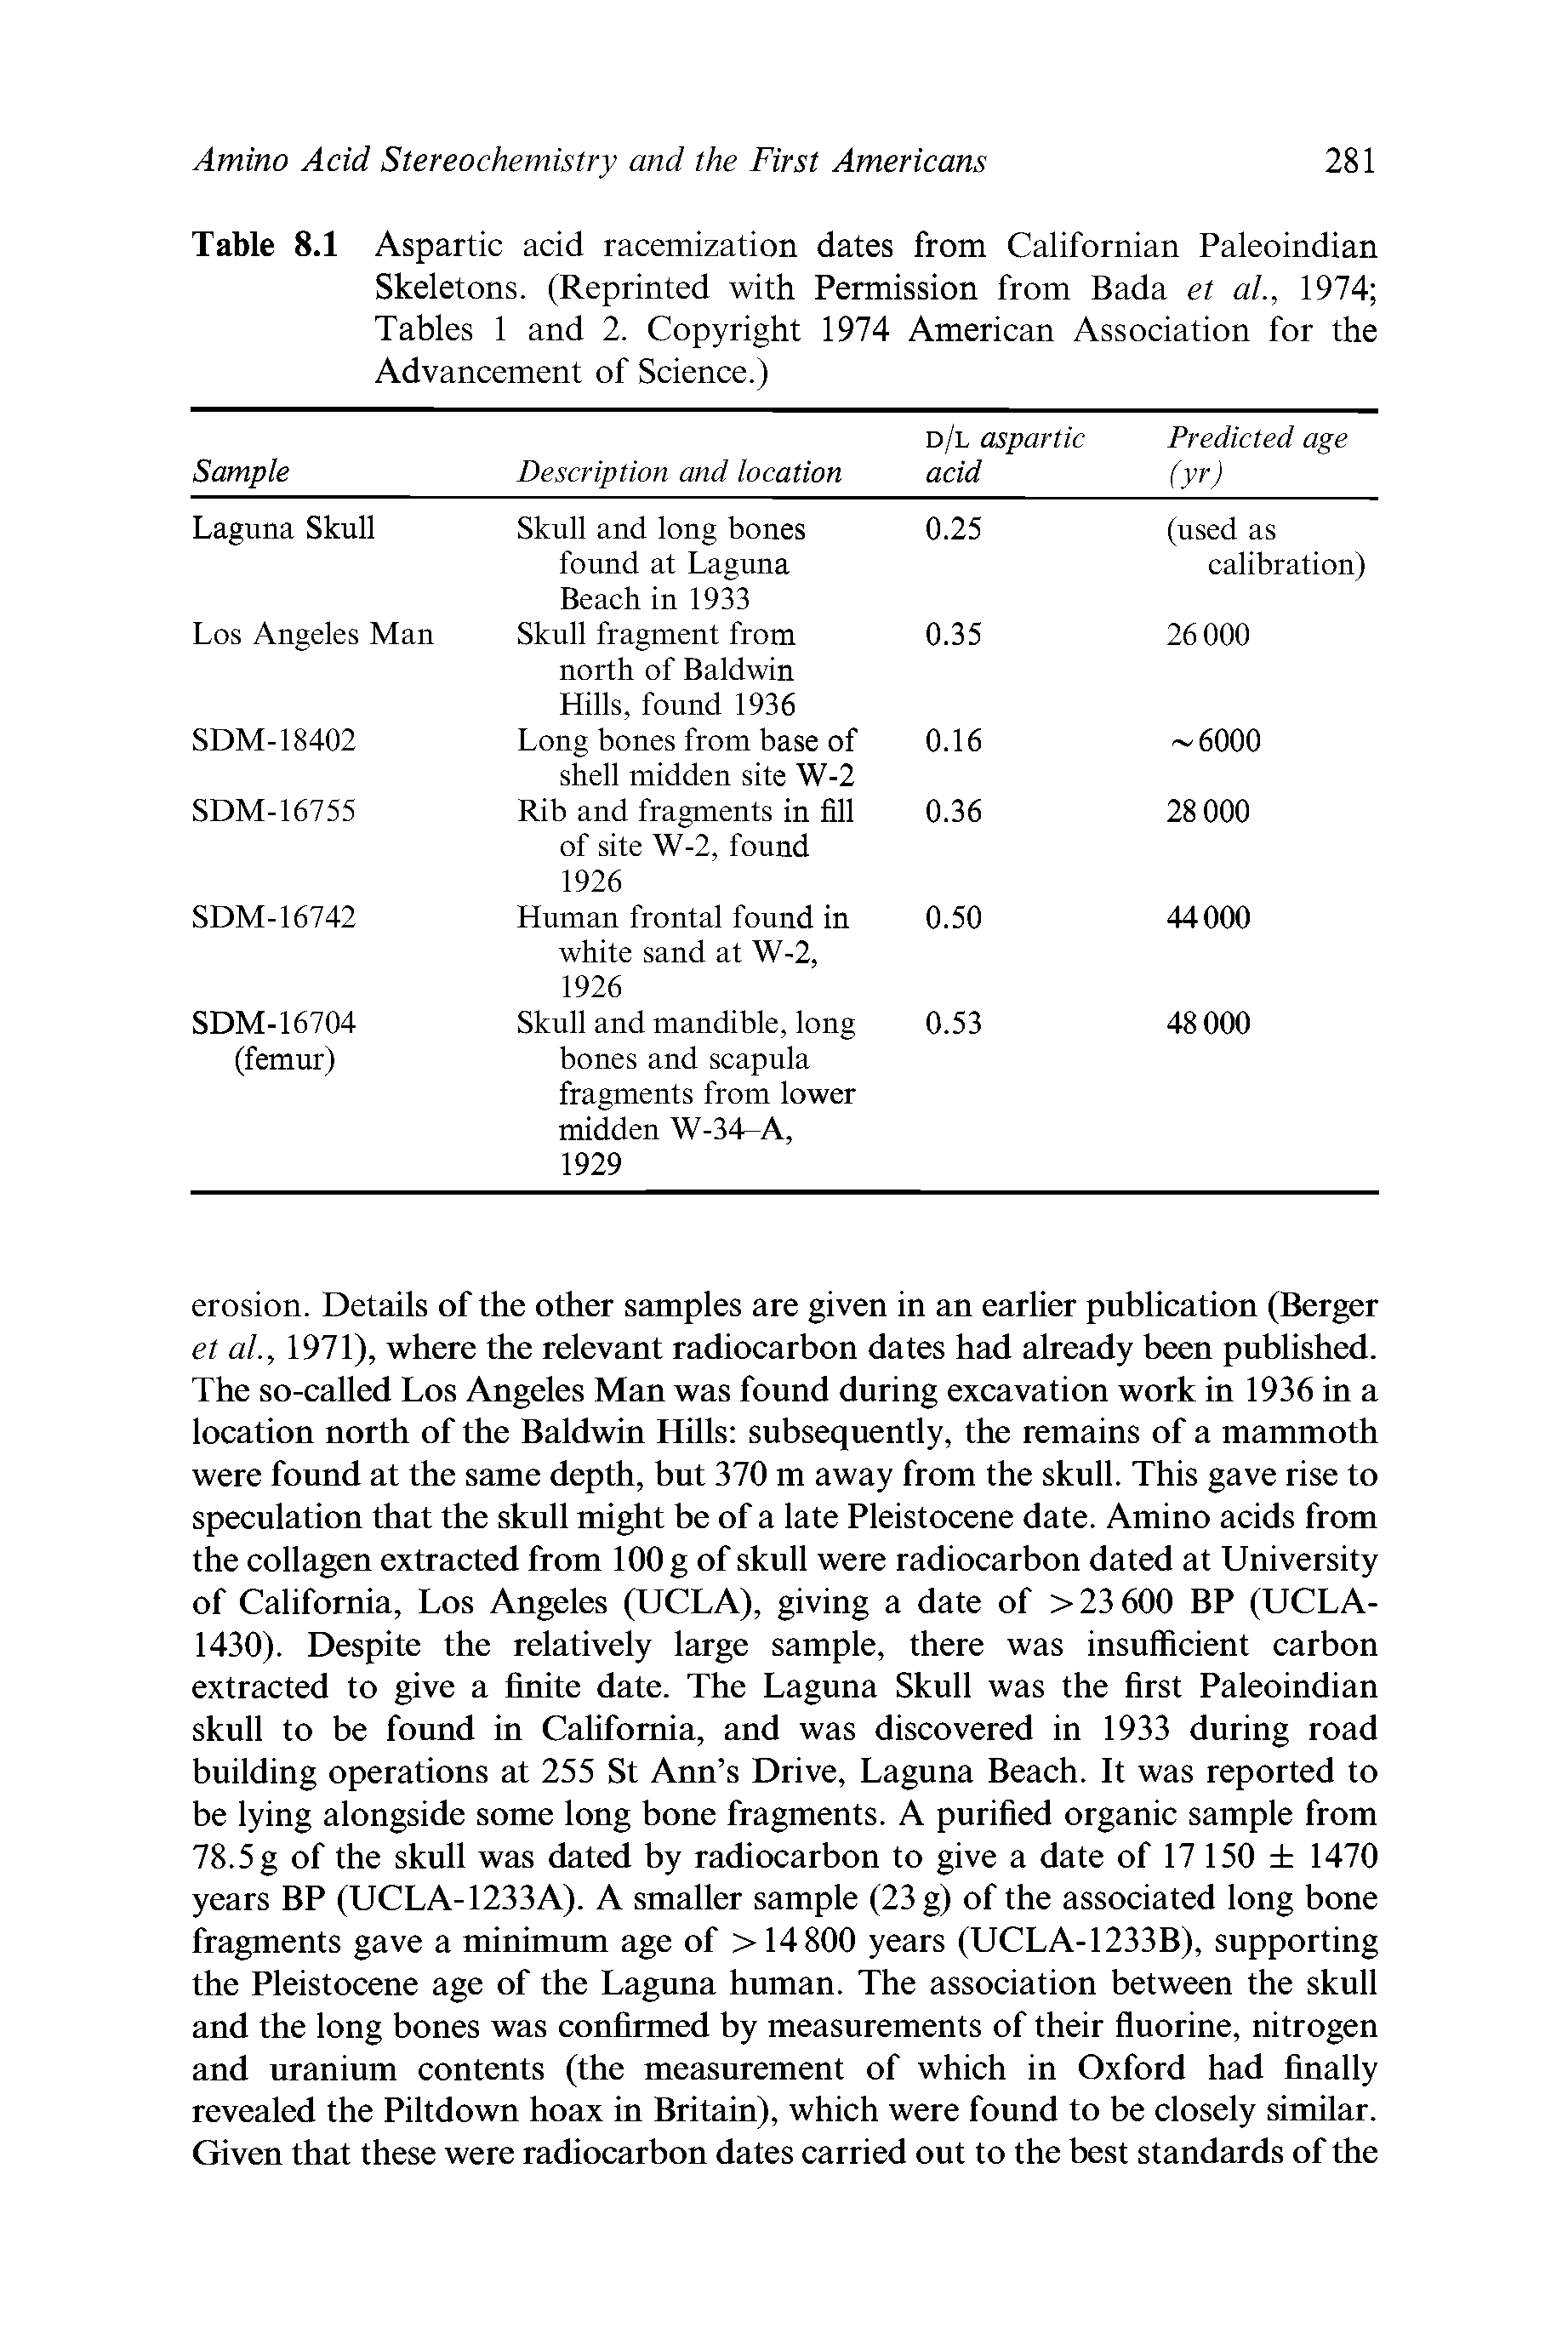 Table 8.1 Aspartic acid racemization dates from Californian Paleoindian Skeletons. (Reprinted with Permission from Bada et al., 1974 Tables 1 and 2. Copyright 1974 American Association for the Advancement of Science.)...